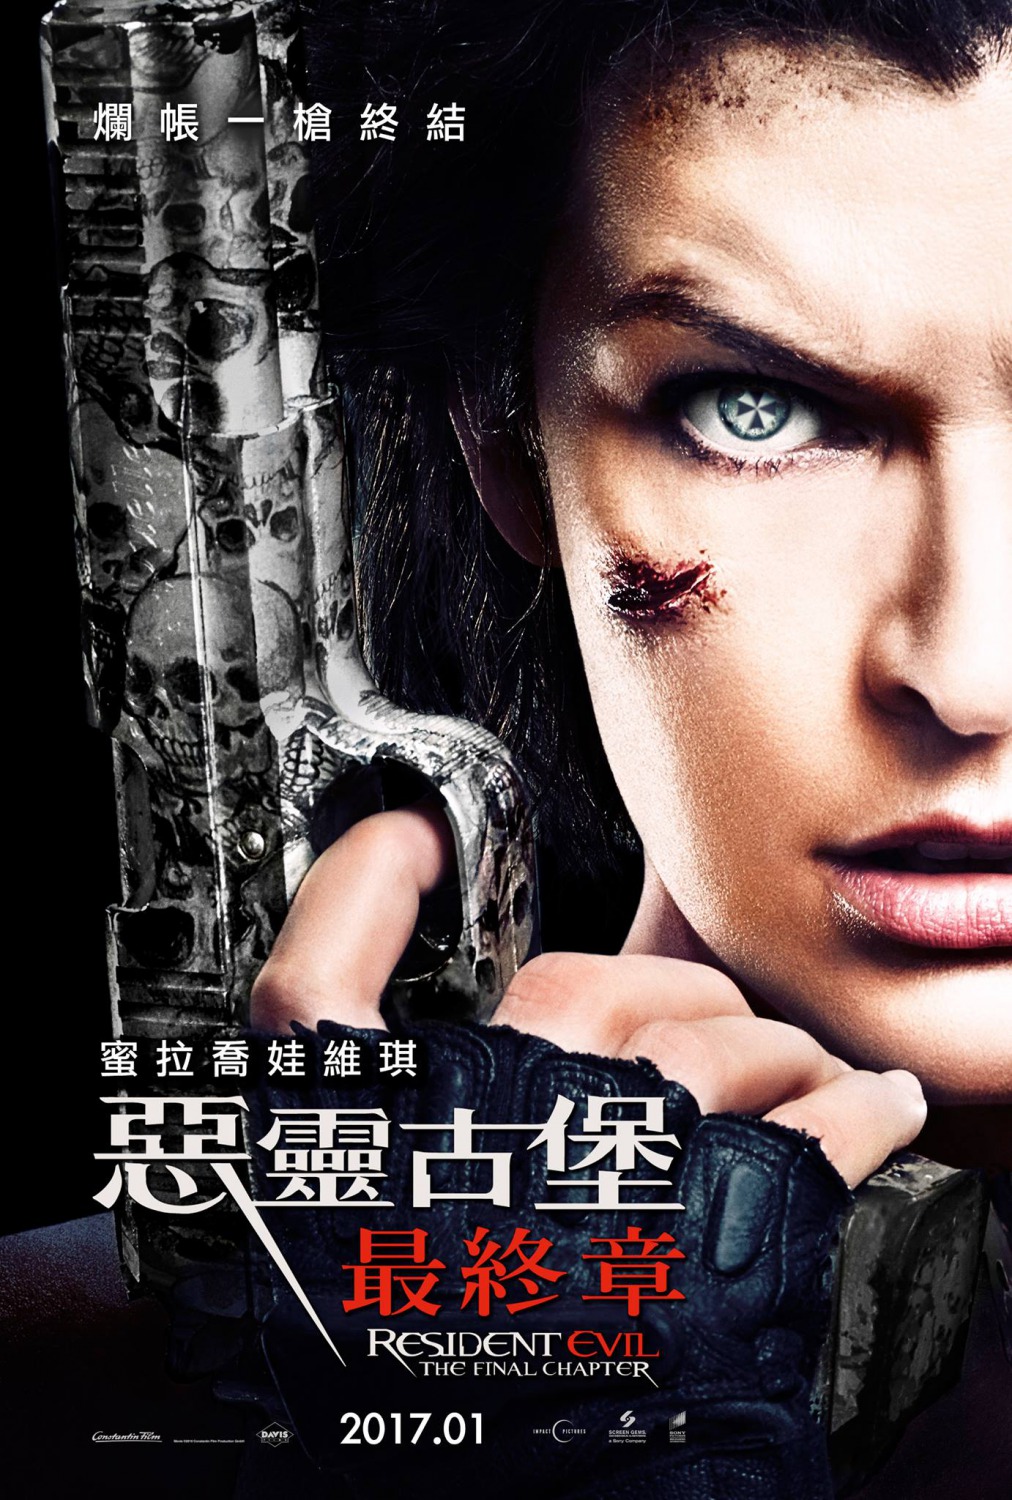 RESIDENT EVIL - THE FINAL CHAPTER: Film Review - THE HORROR ENTERTAINMENT  MAGAZINE